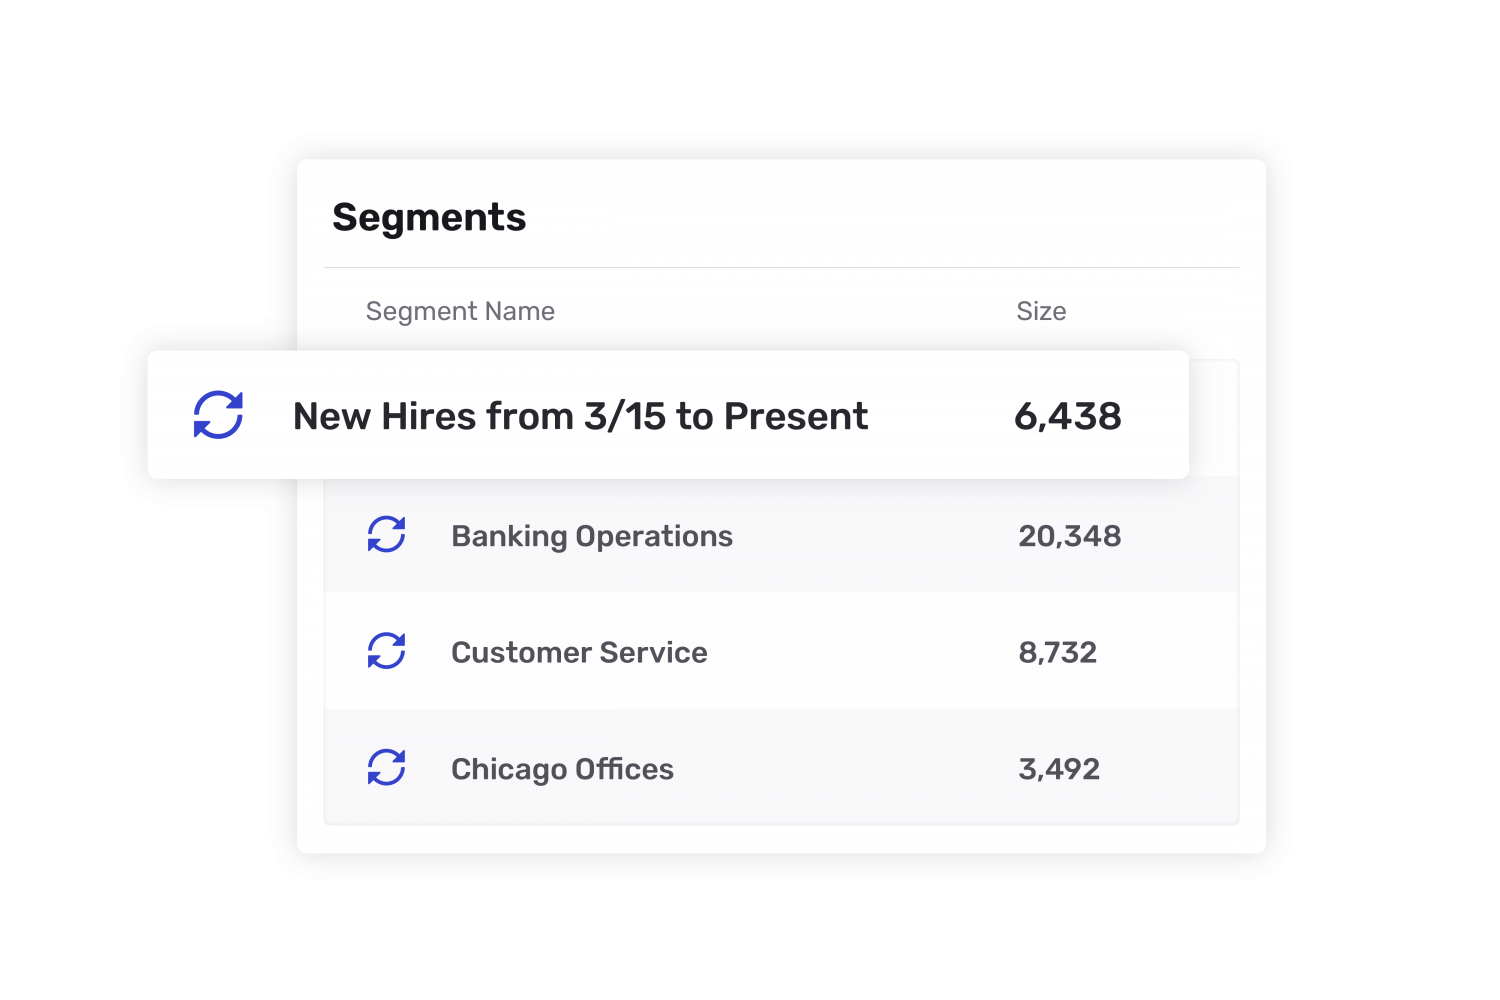 Synced segments from your HRIS, highlighting a list called "New Hires from 3/15 to Present"